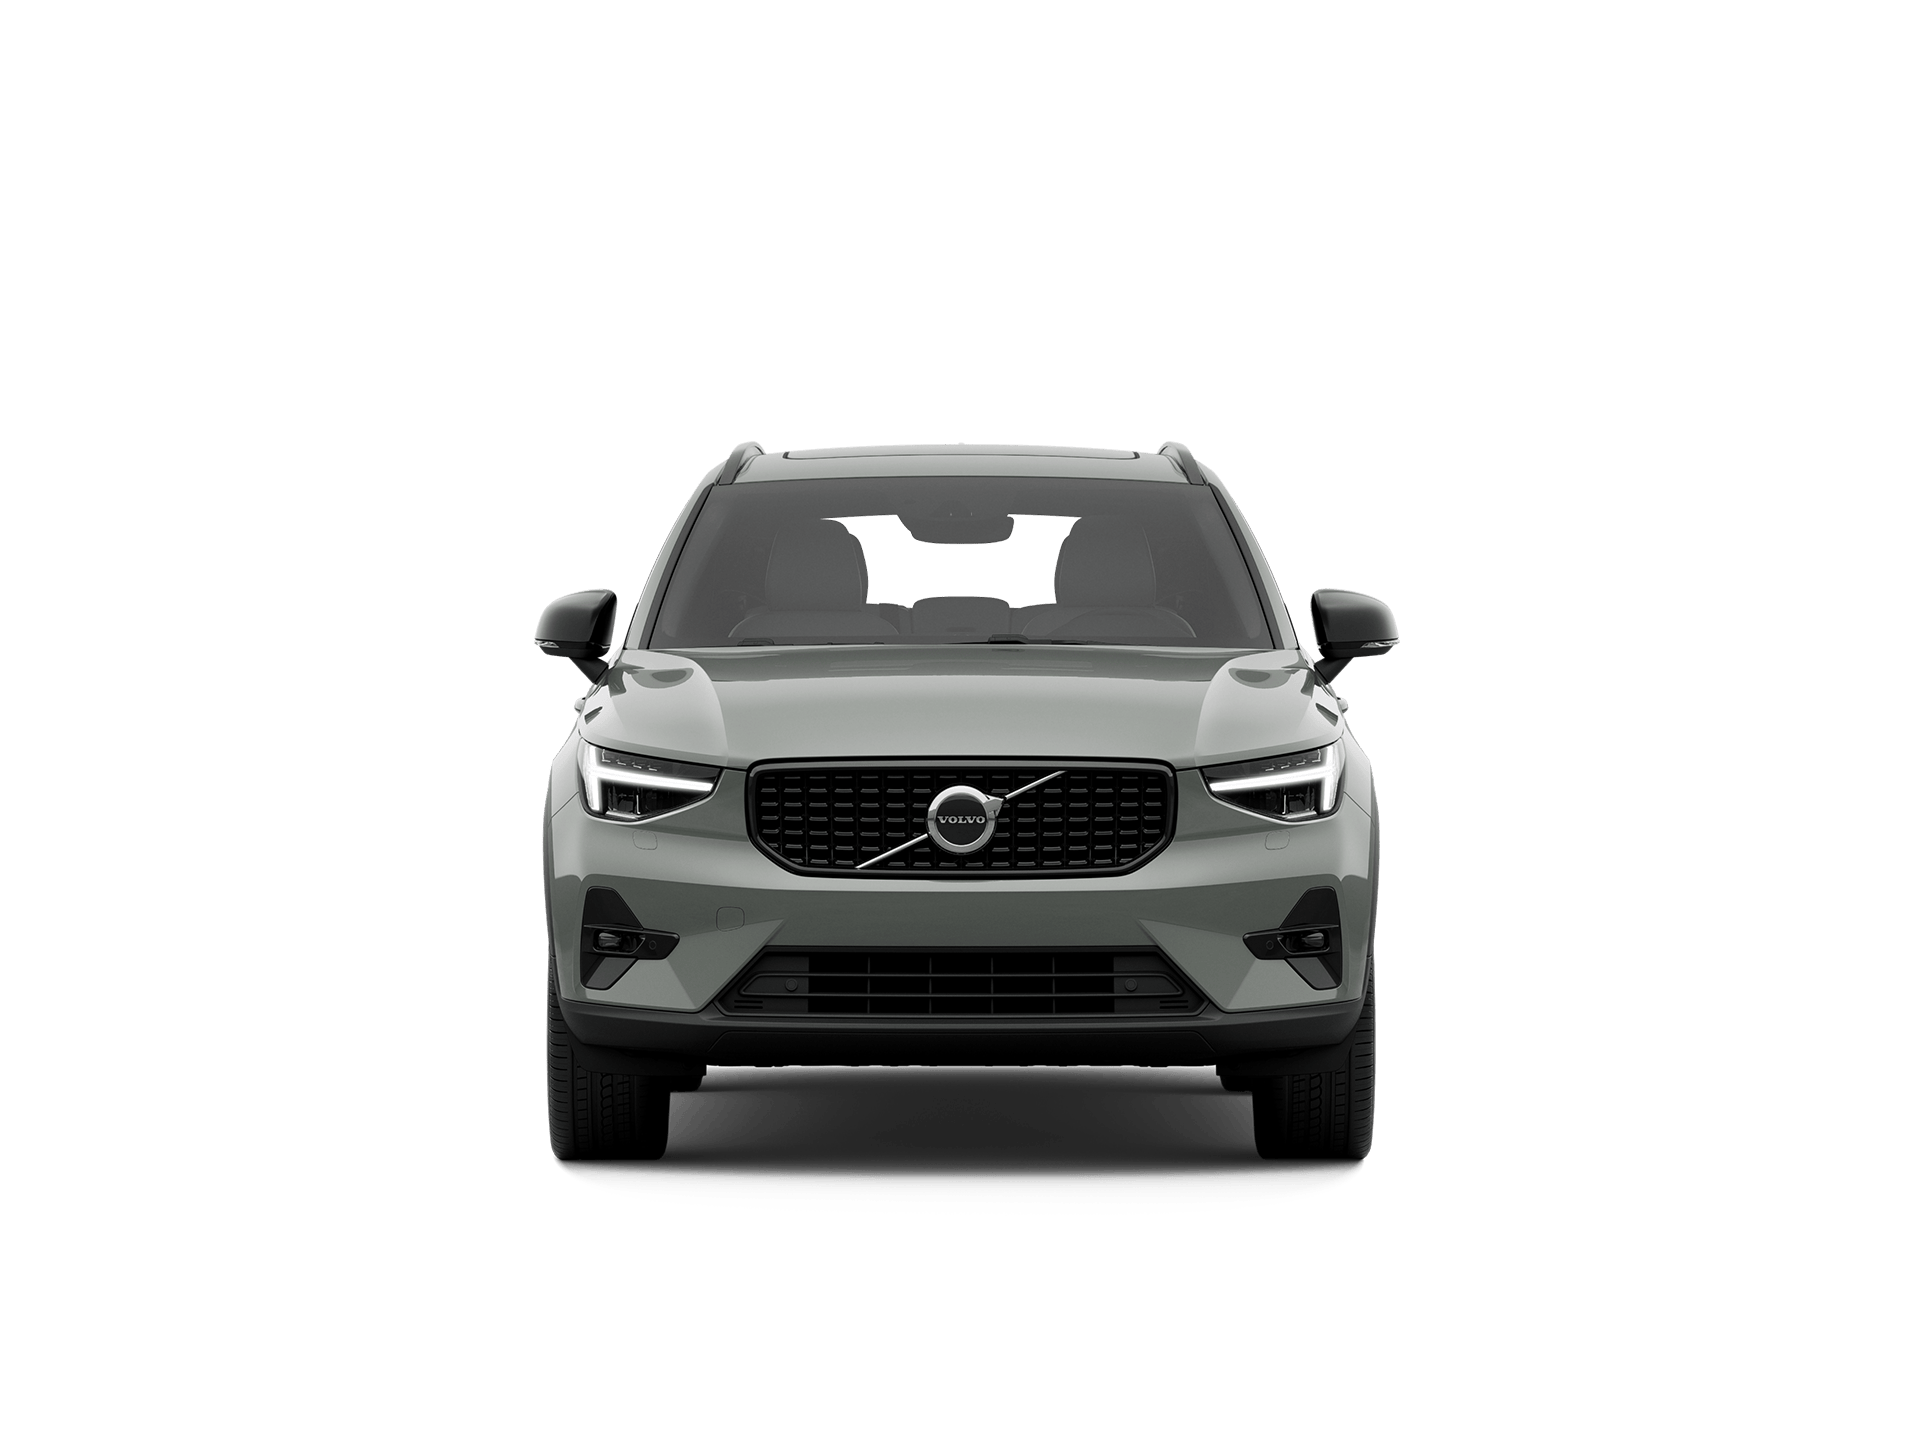 The front of a Volvo XC40 SUV.